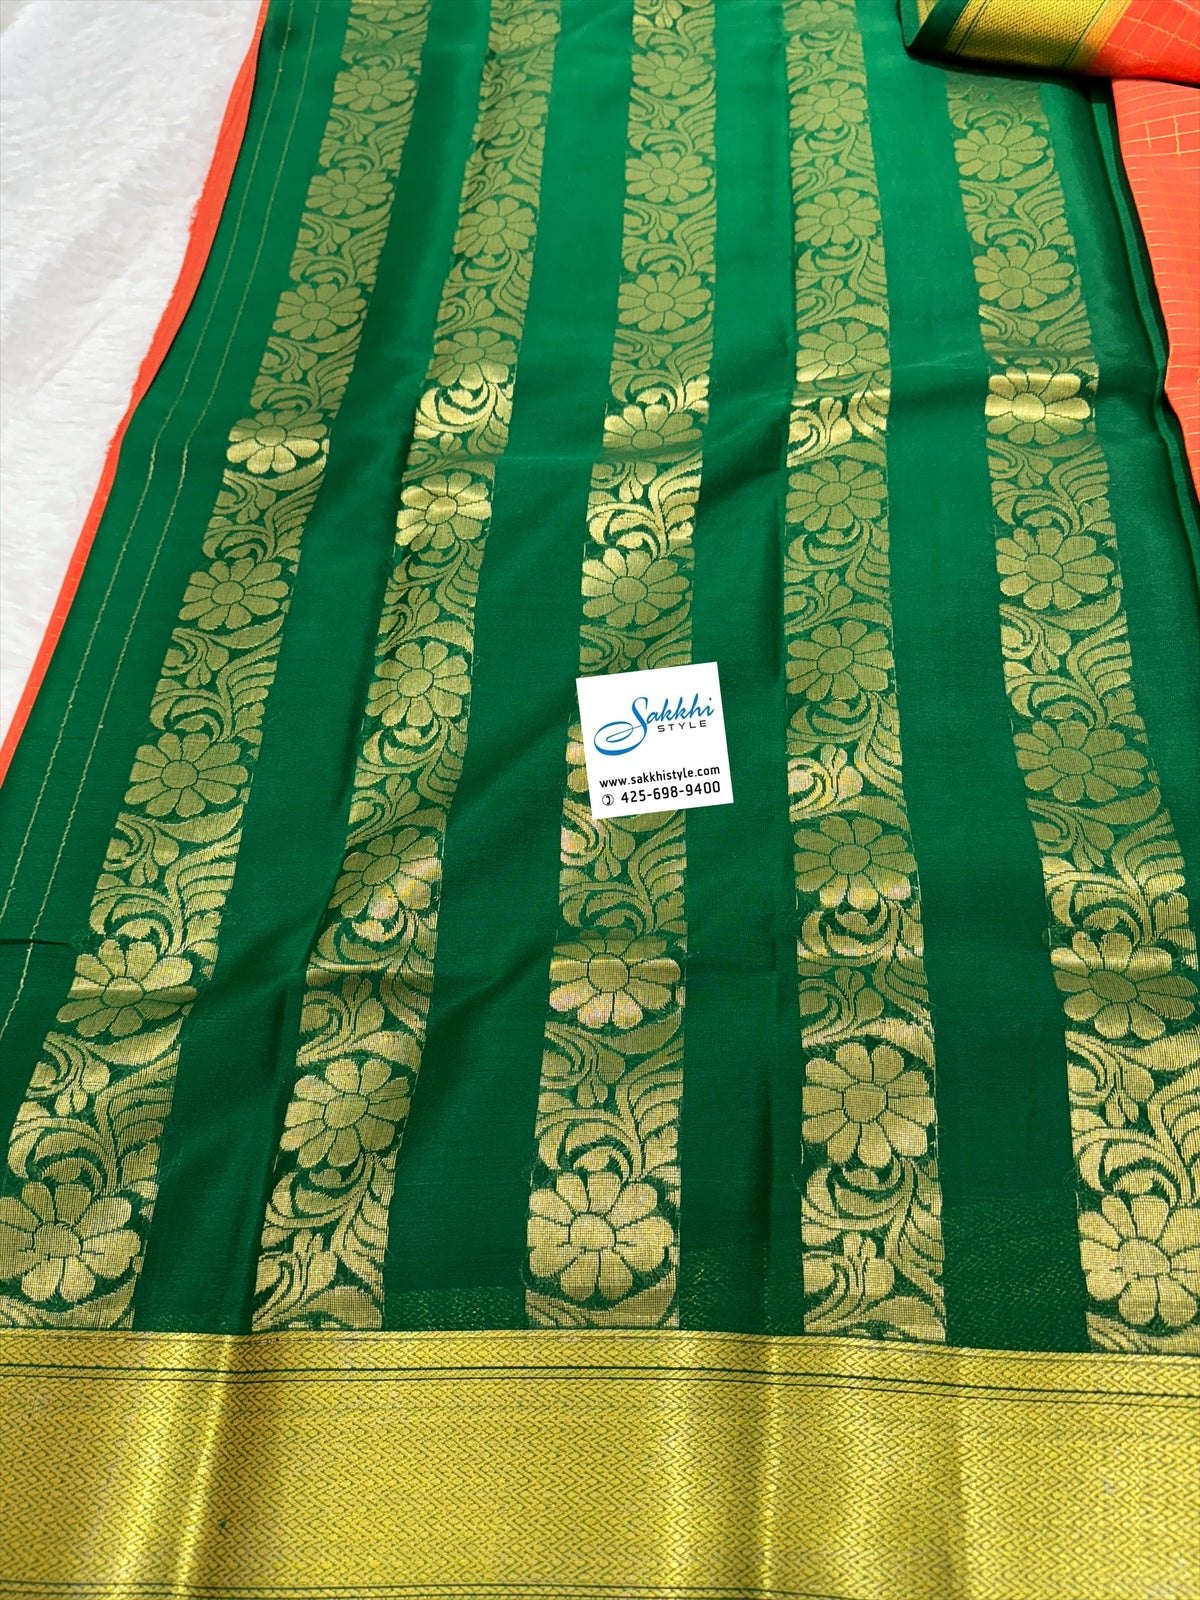 PURE MYSORE SILK SAREE IN BLEND OF ORANGE AND GREEN HUES